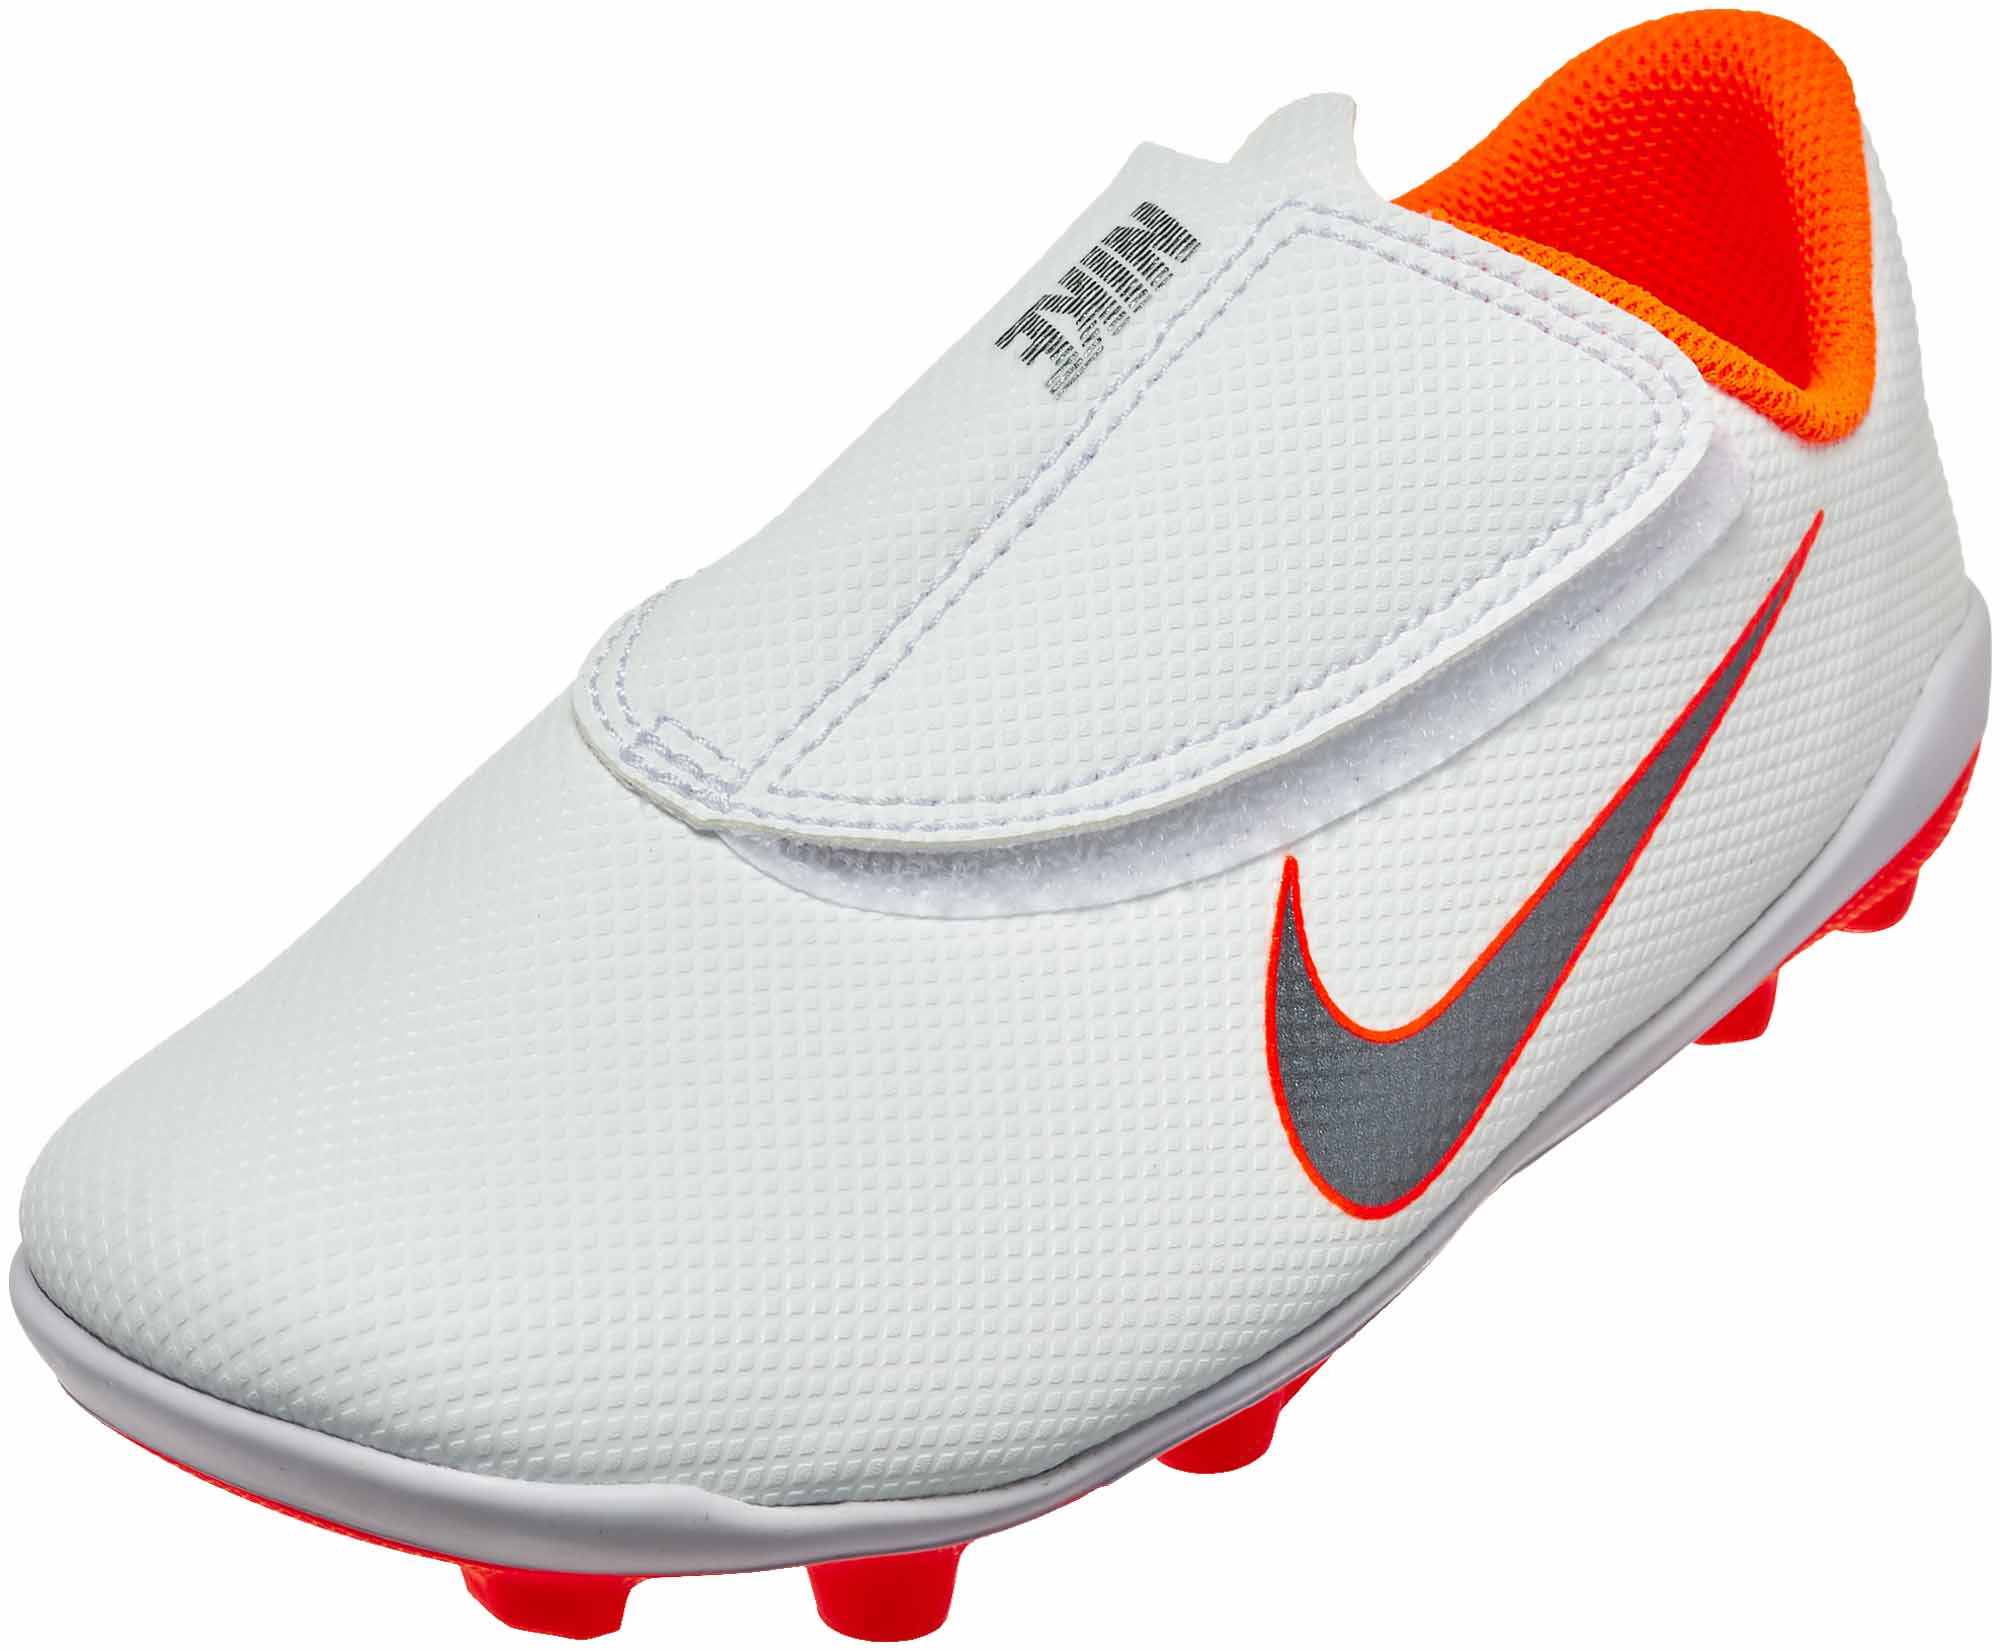 Nike Shoes Nike Mercurial Vapor Xii Just Do It Pack Color